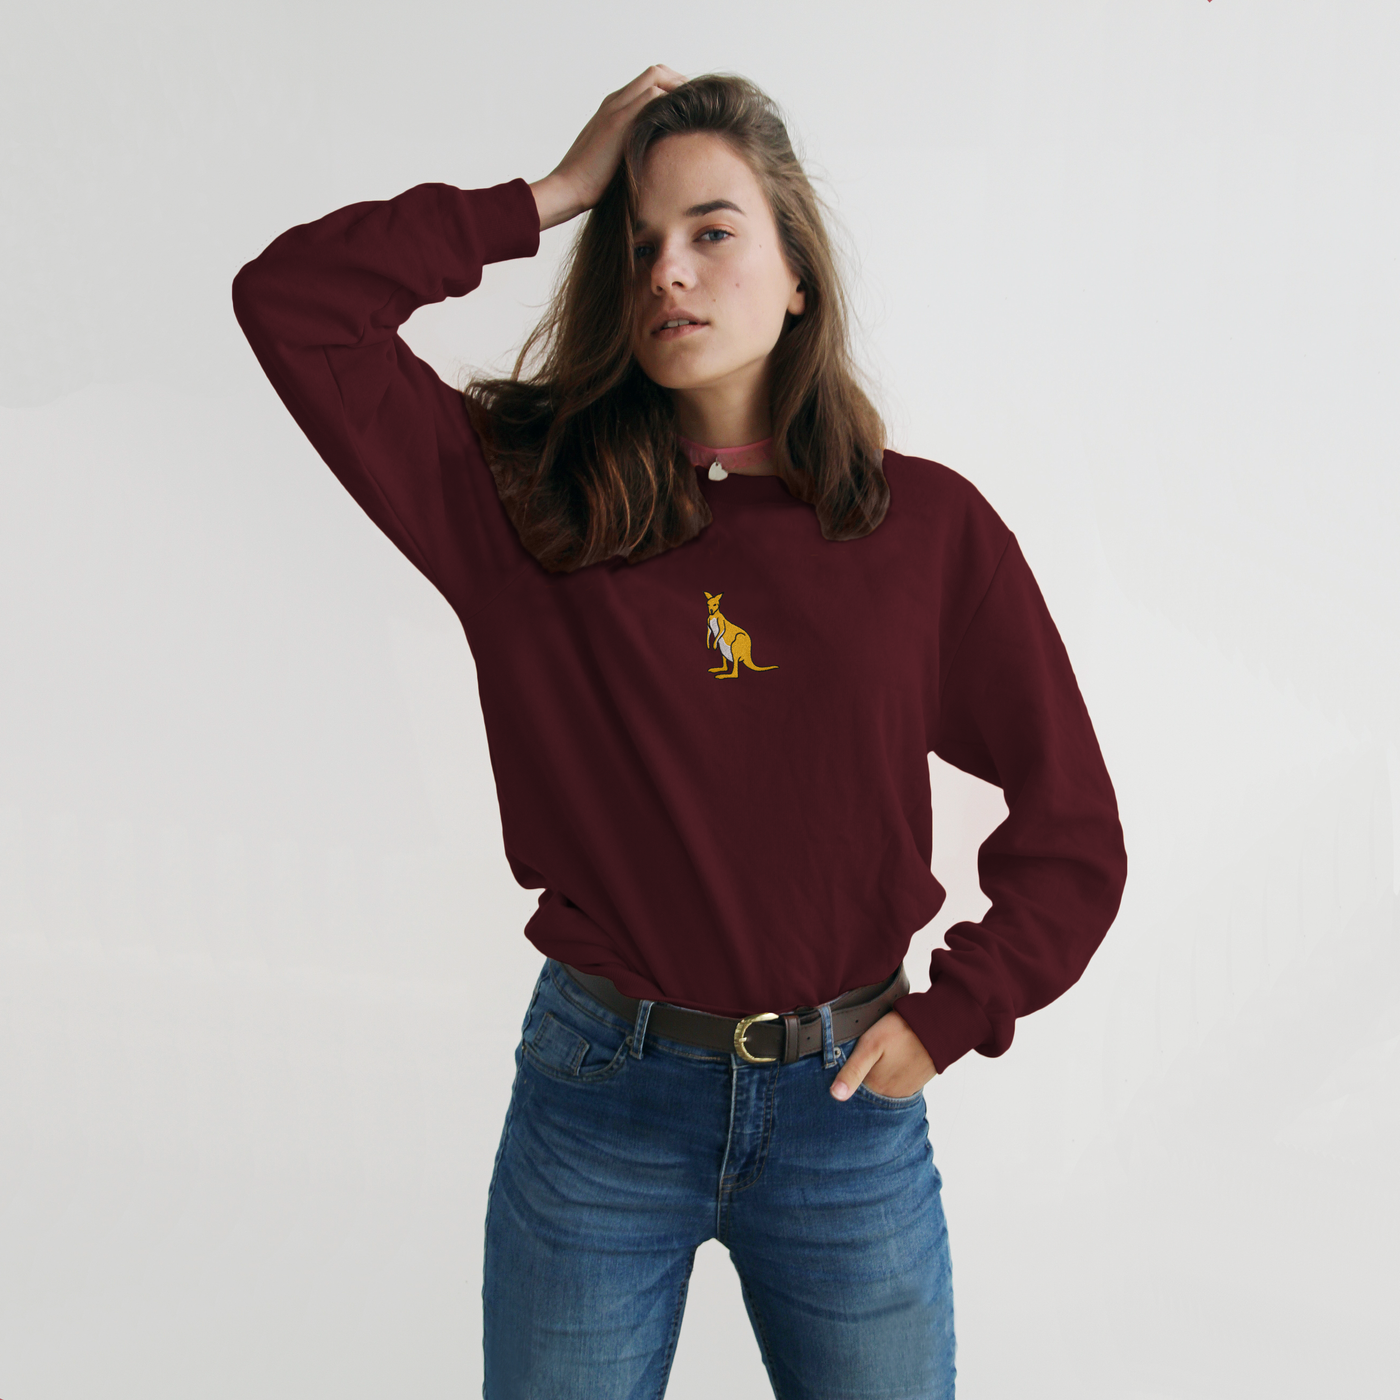 Bobby's Planet Women's Embroidered Kangaroo Long Sleeve Shirt from Australia Down Under Animals Collection in Maroon Color#color_maroon